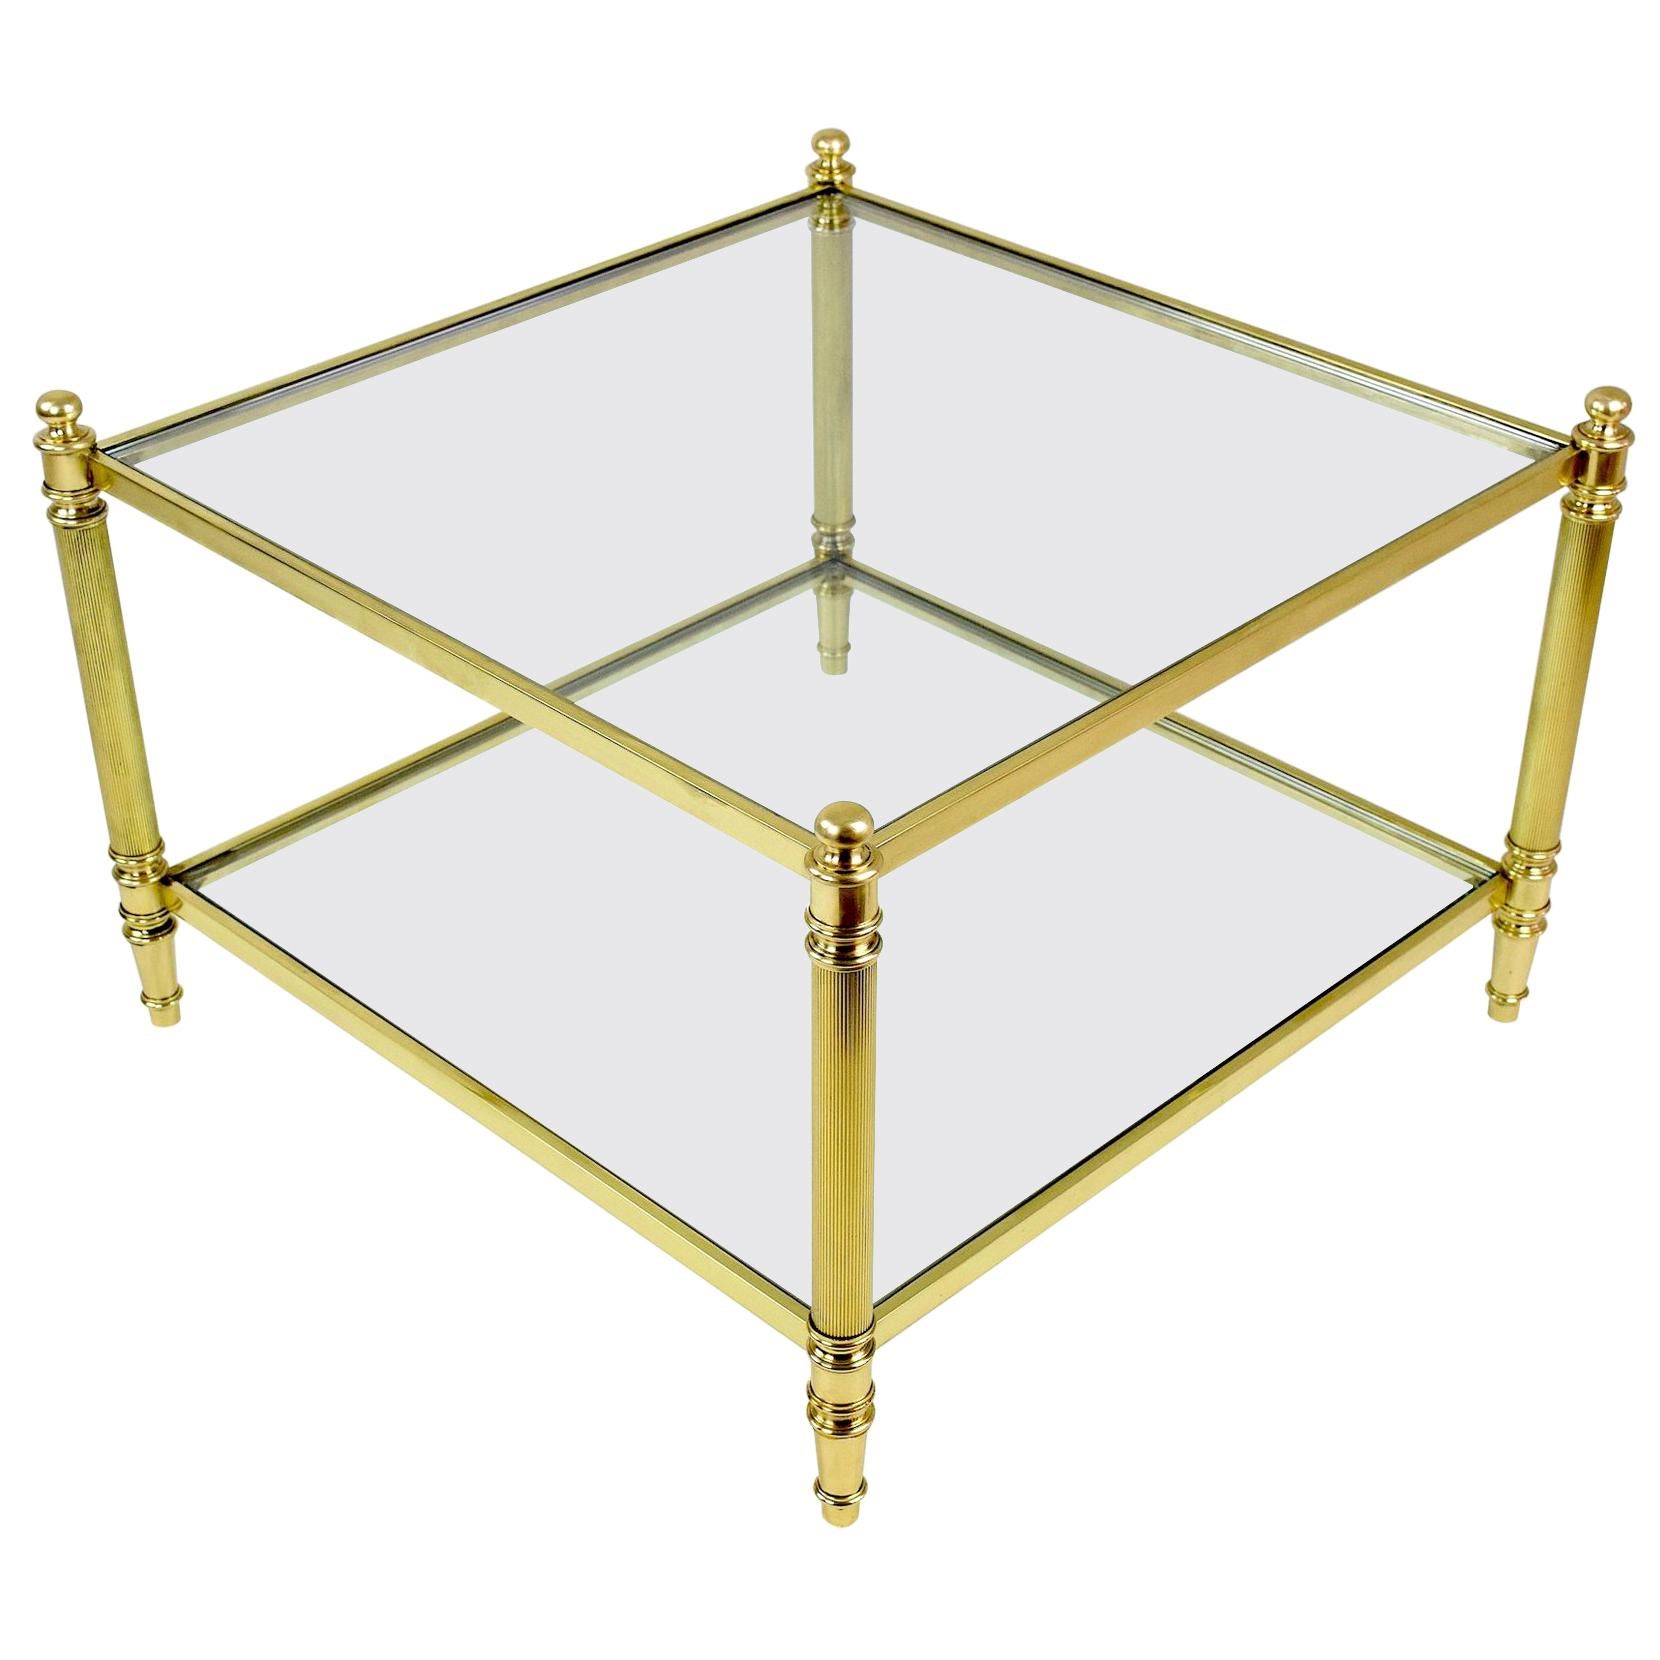 20th century vintage two-tiered square coffee or side table in solid gold brass structure and clear glass in Hollywood Regency style.
In beautiful condition with all original glass.
France, circa 1960s-1970s, in the style of Maison Jansen.
 ----
All